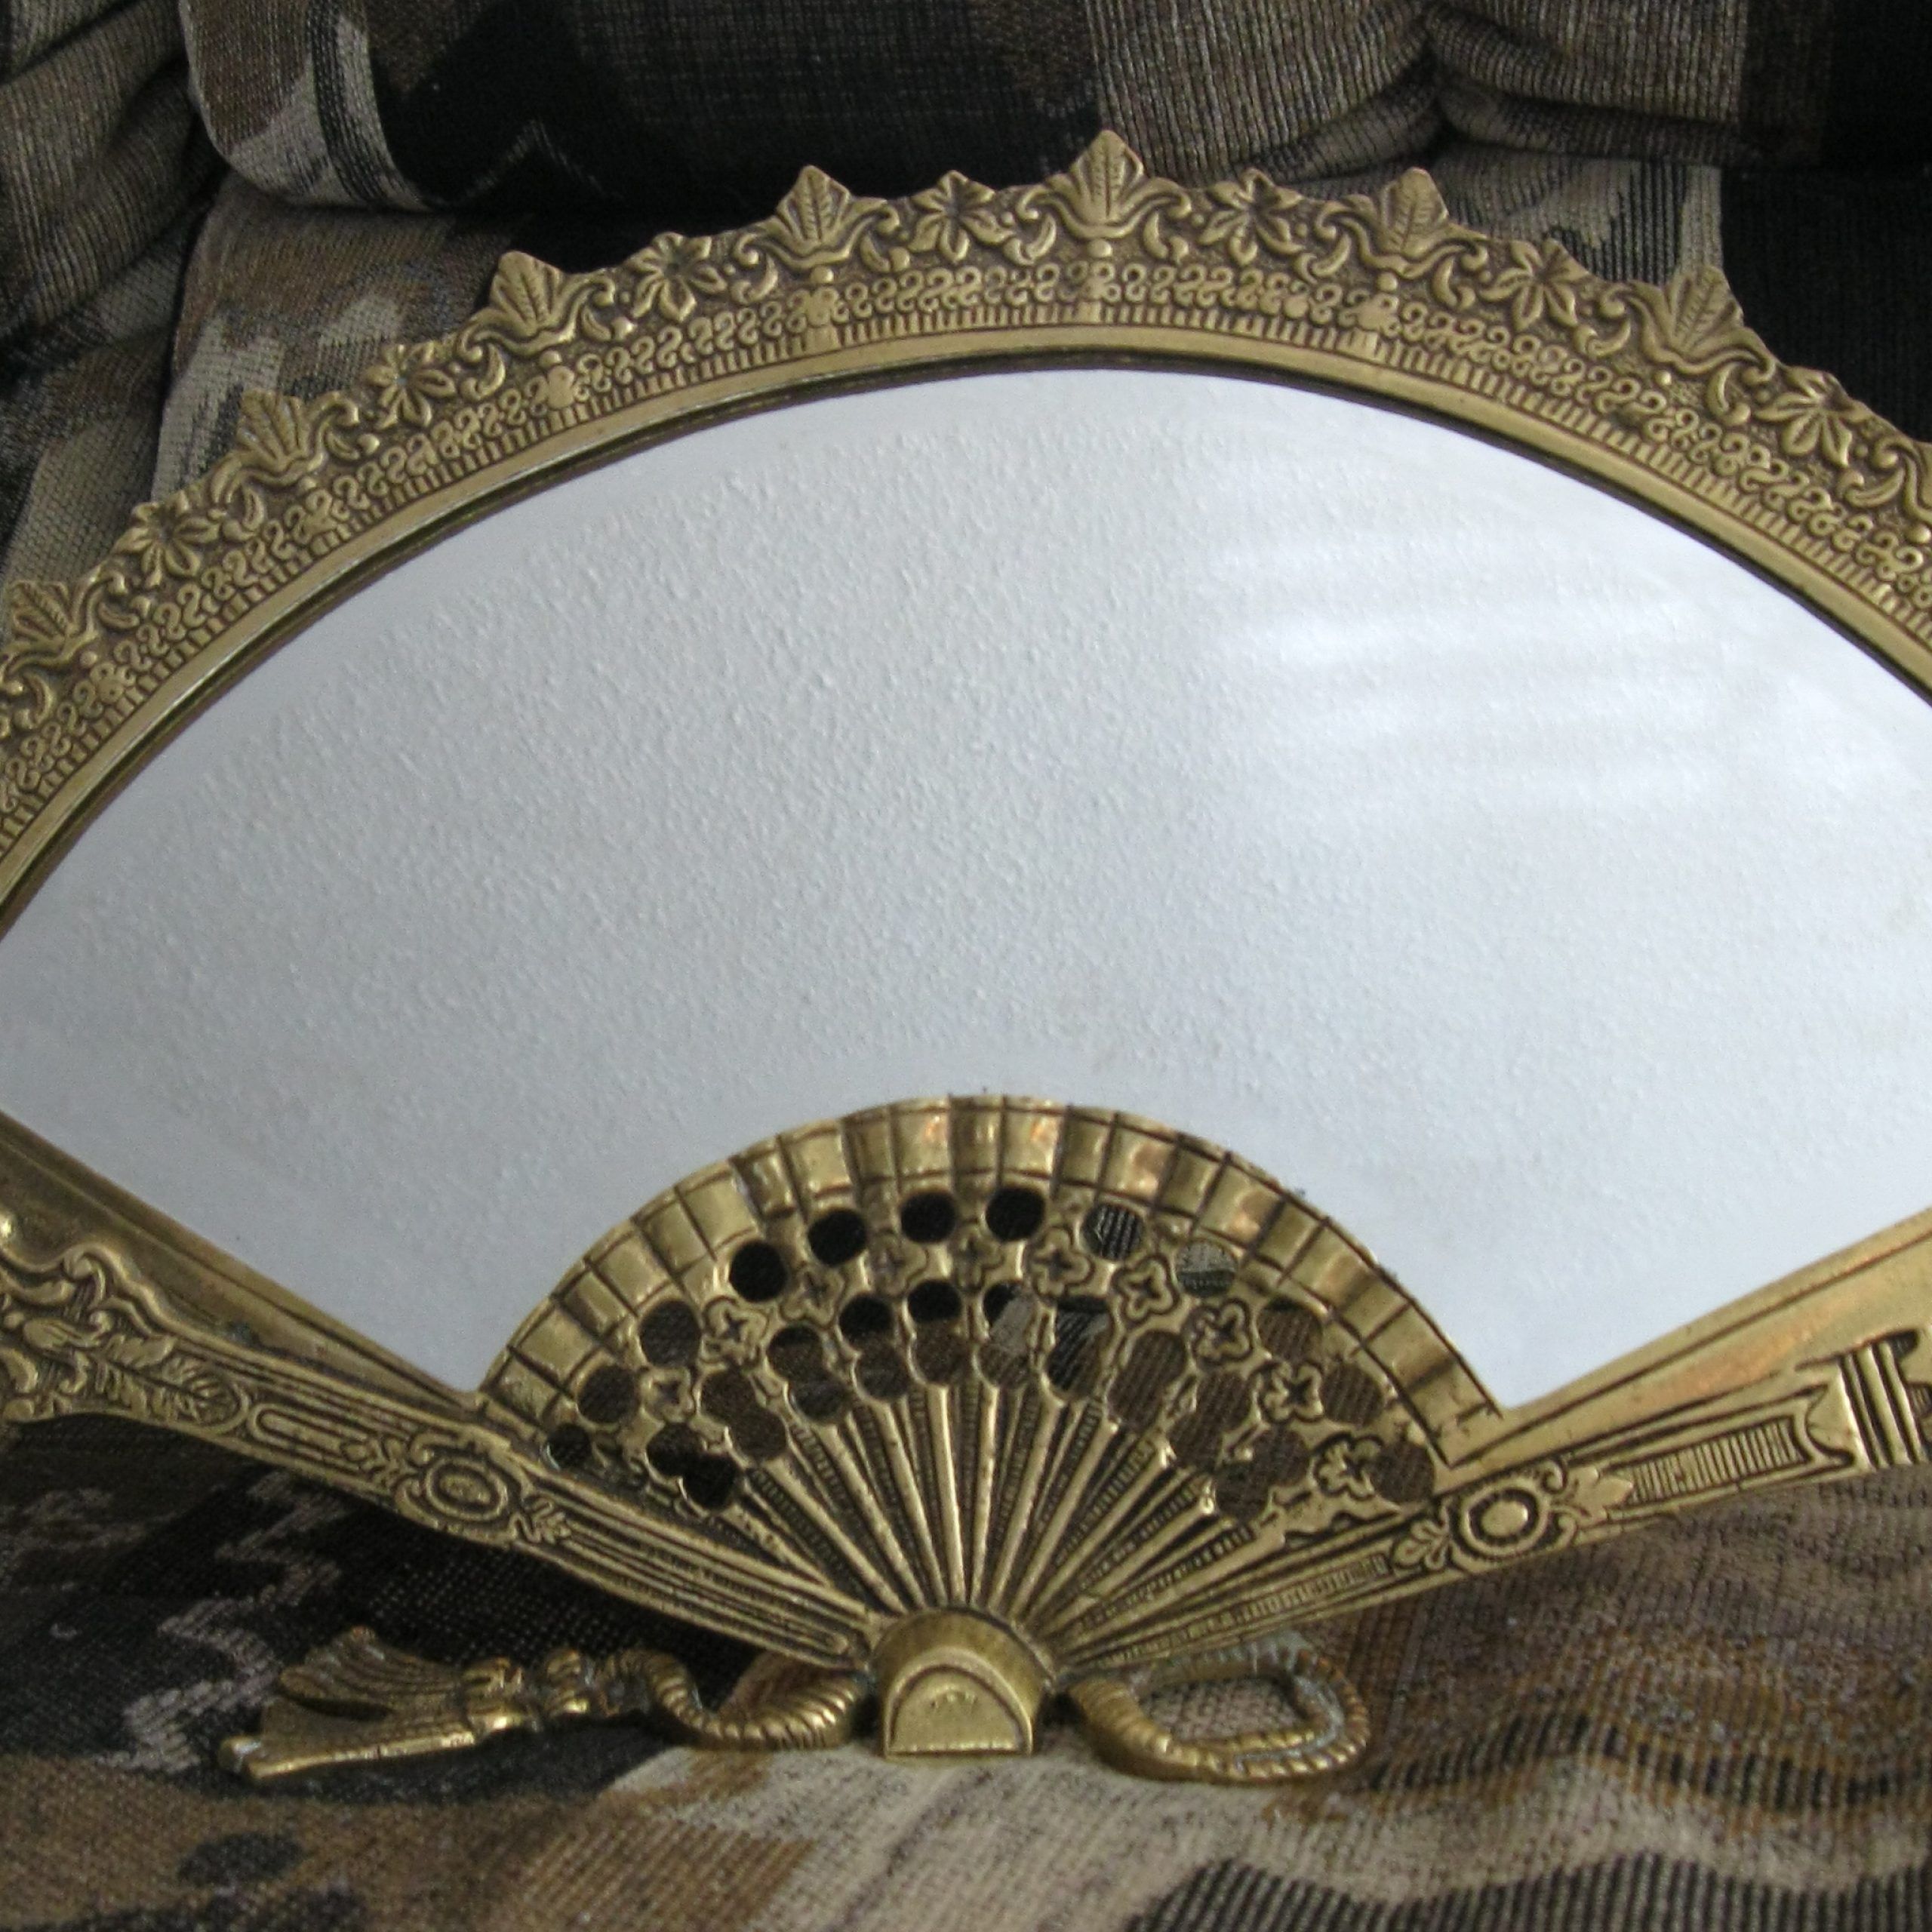 Current Antique Victorian Solid Brass Fan Mirror Antique Appraisal (View 3 of 15)